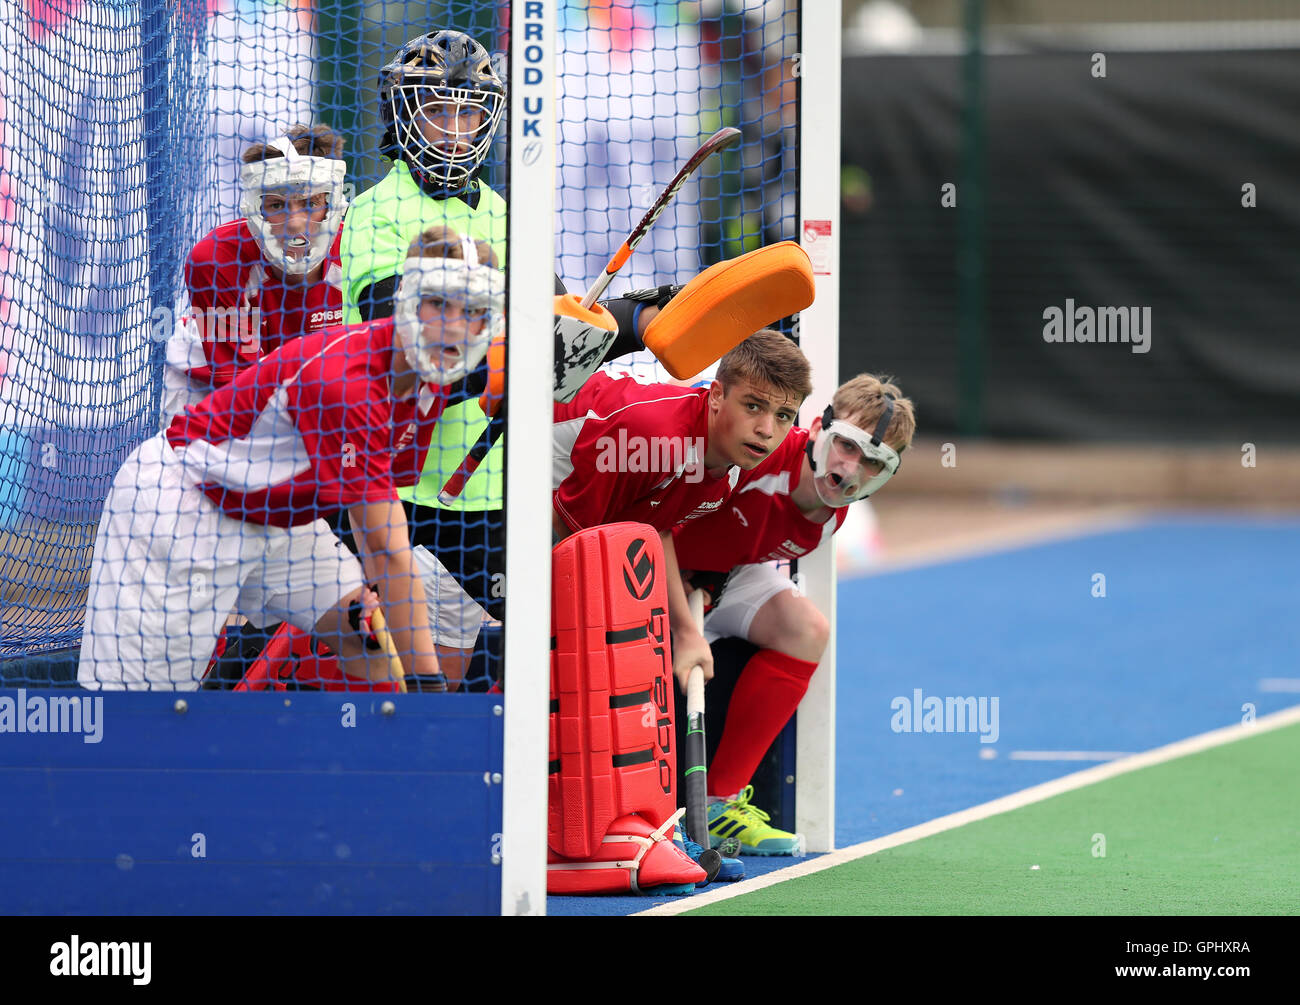 Ulster's players line up in the goal mouth to defend a penalty corner during the 3rd/4th place Boys Hockey Play Off match on day four of the 2016 School Games at Loughborough University. PRESS ASSOCIATION Photo. Picture date: Sunday September 4, 2016. Stock Photo